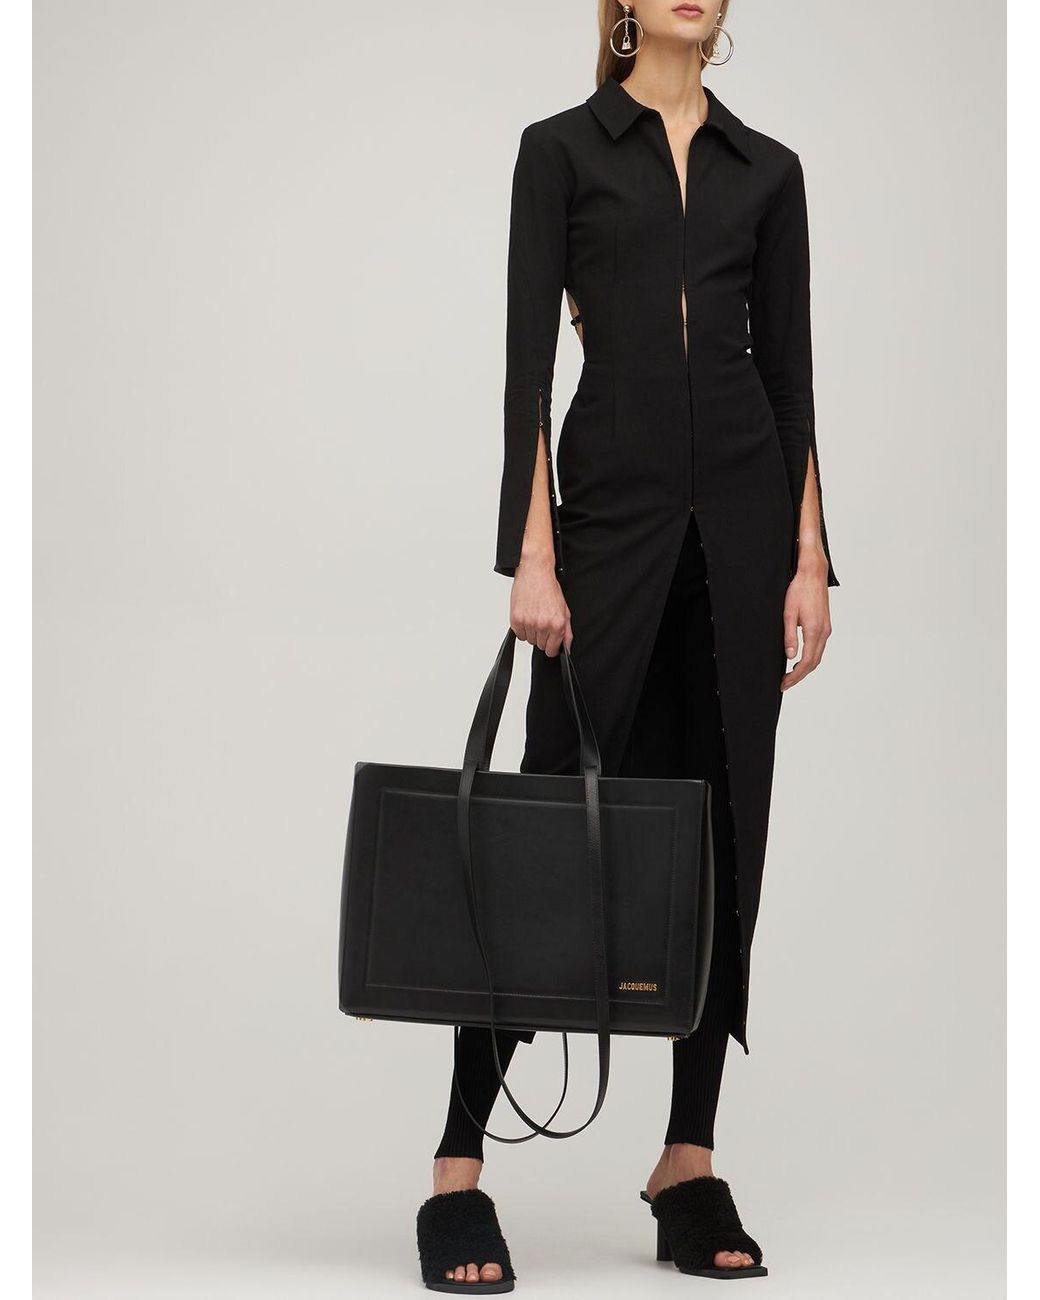 Jacquemus Le Cabas Neve Leather Tote Bag in Black | Lyst Canada